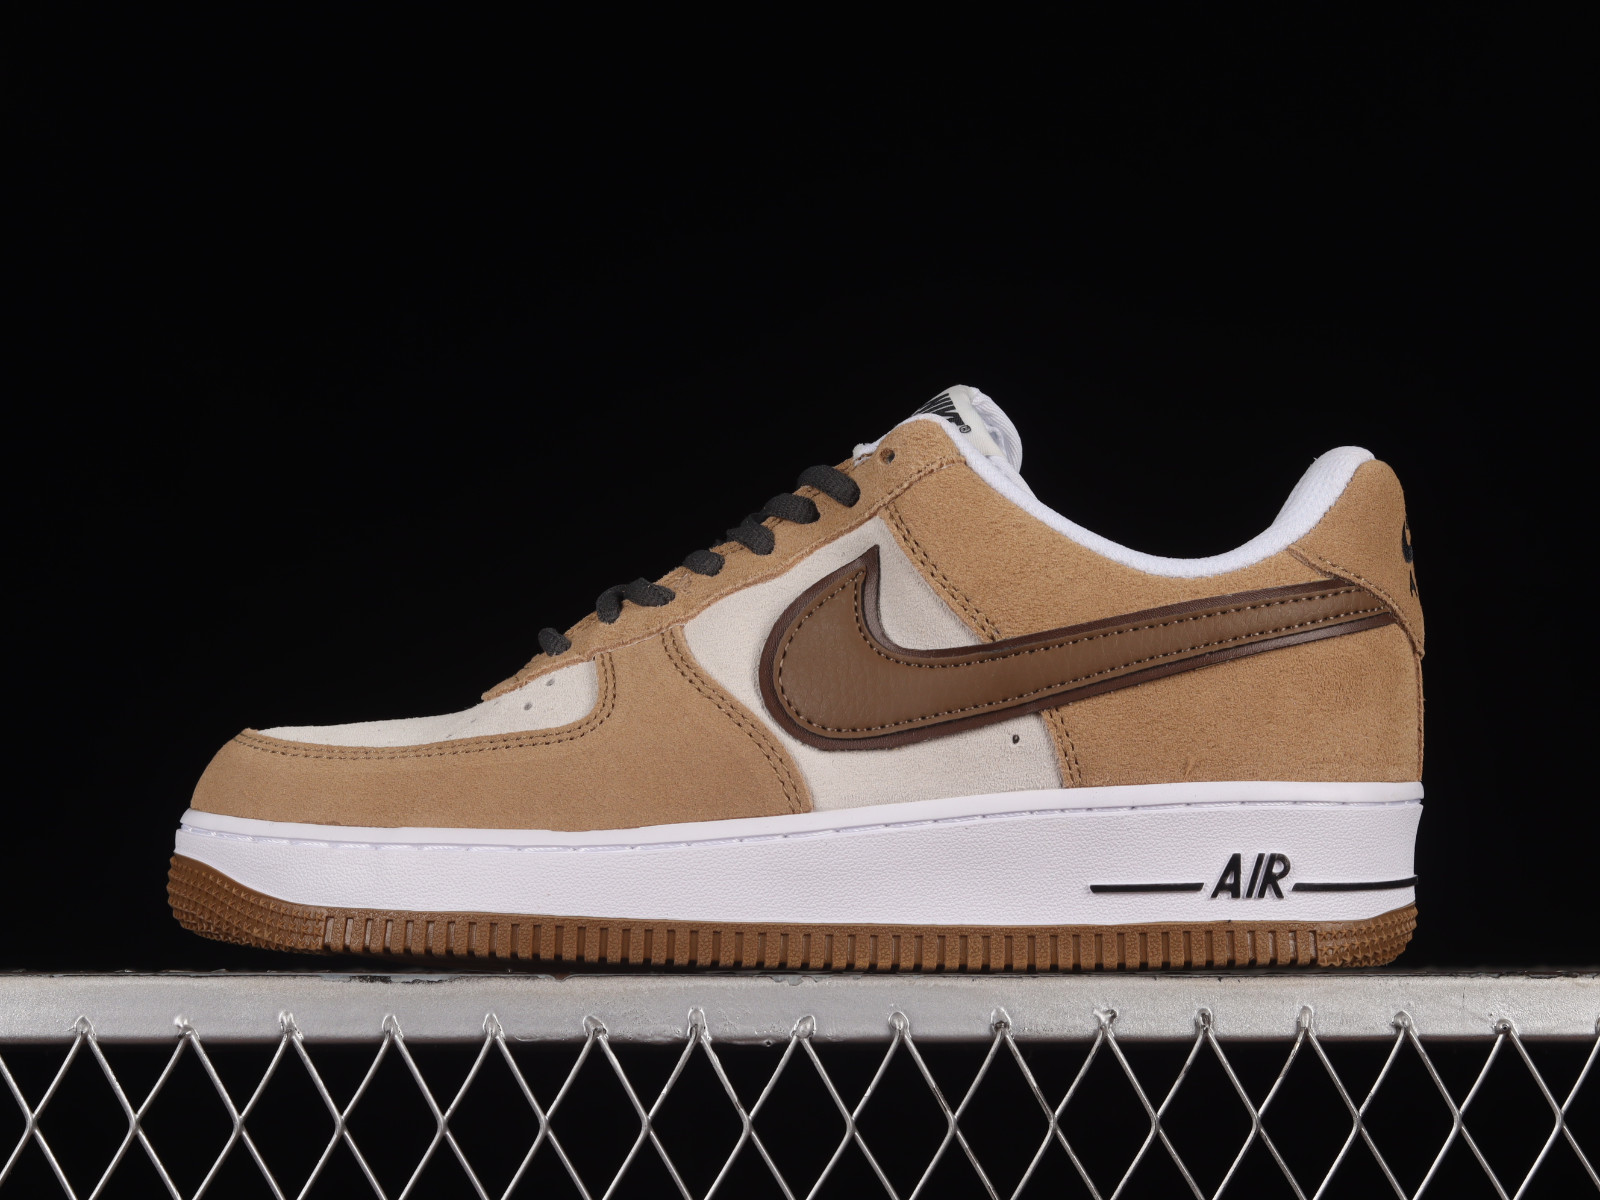 mogelijkheid heilige Wees MultiscaleconsultingShops - Nike Dunk Low Court Purple - Nike Air Force 1  07 Low Khaki Suede White Black HH9636 - 326